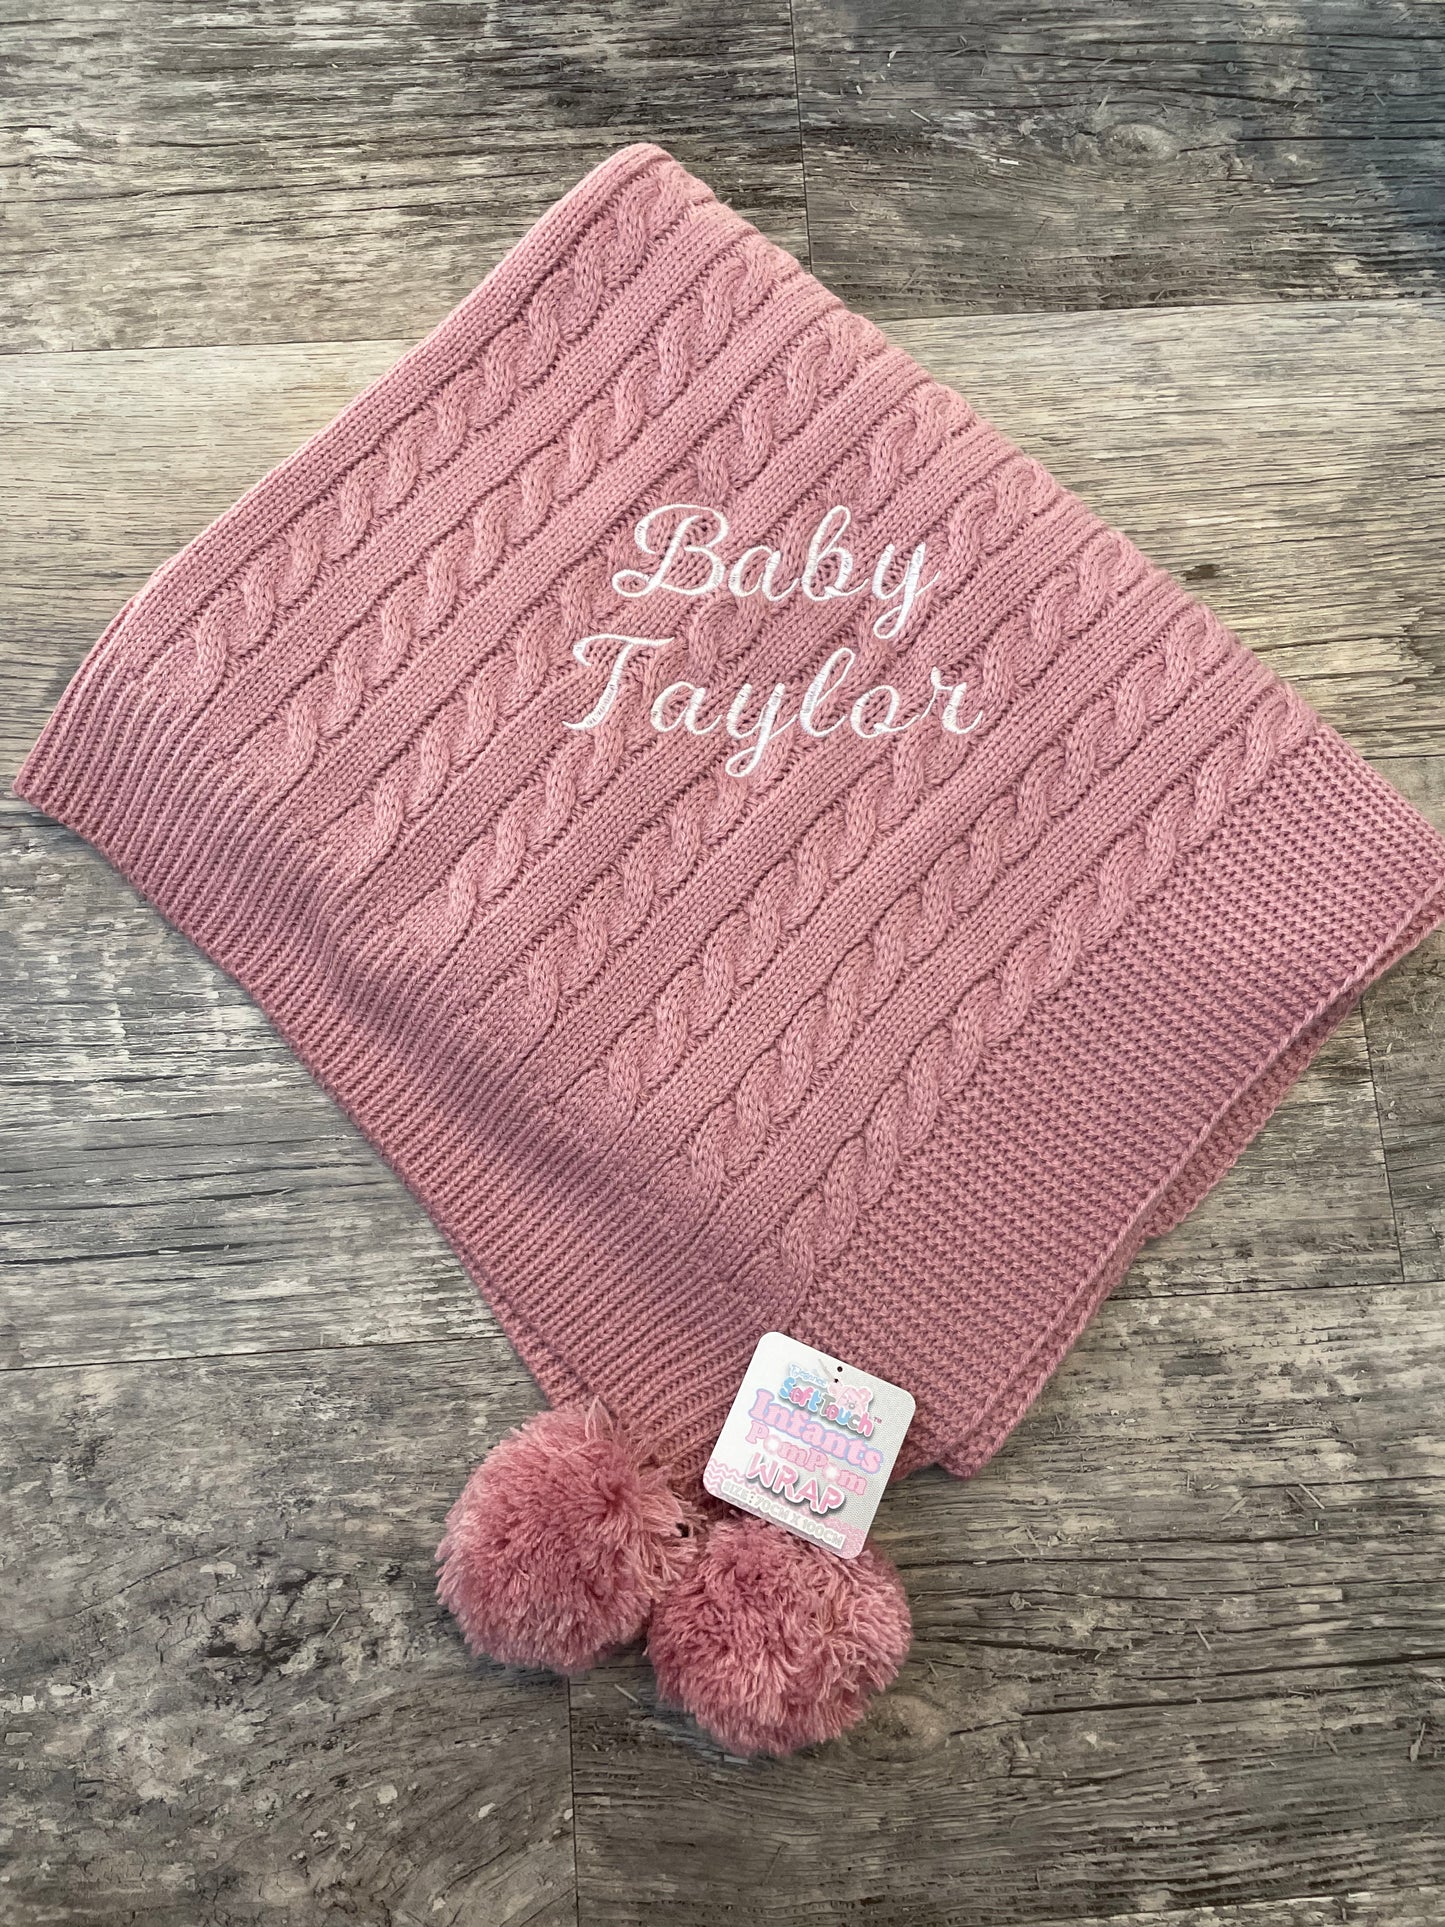 Personalised pink cable knit wrap blanket